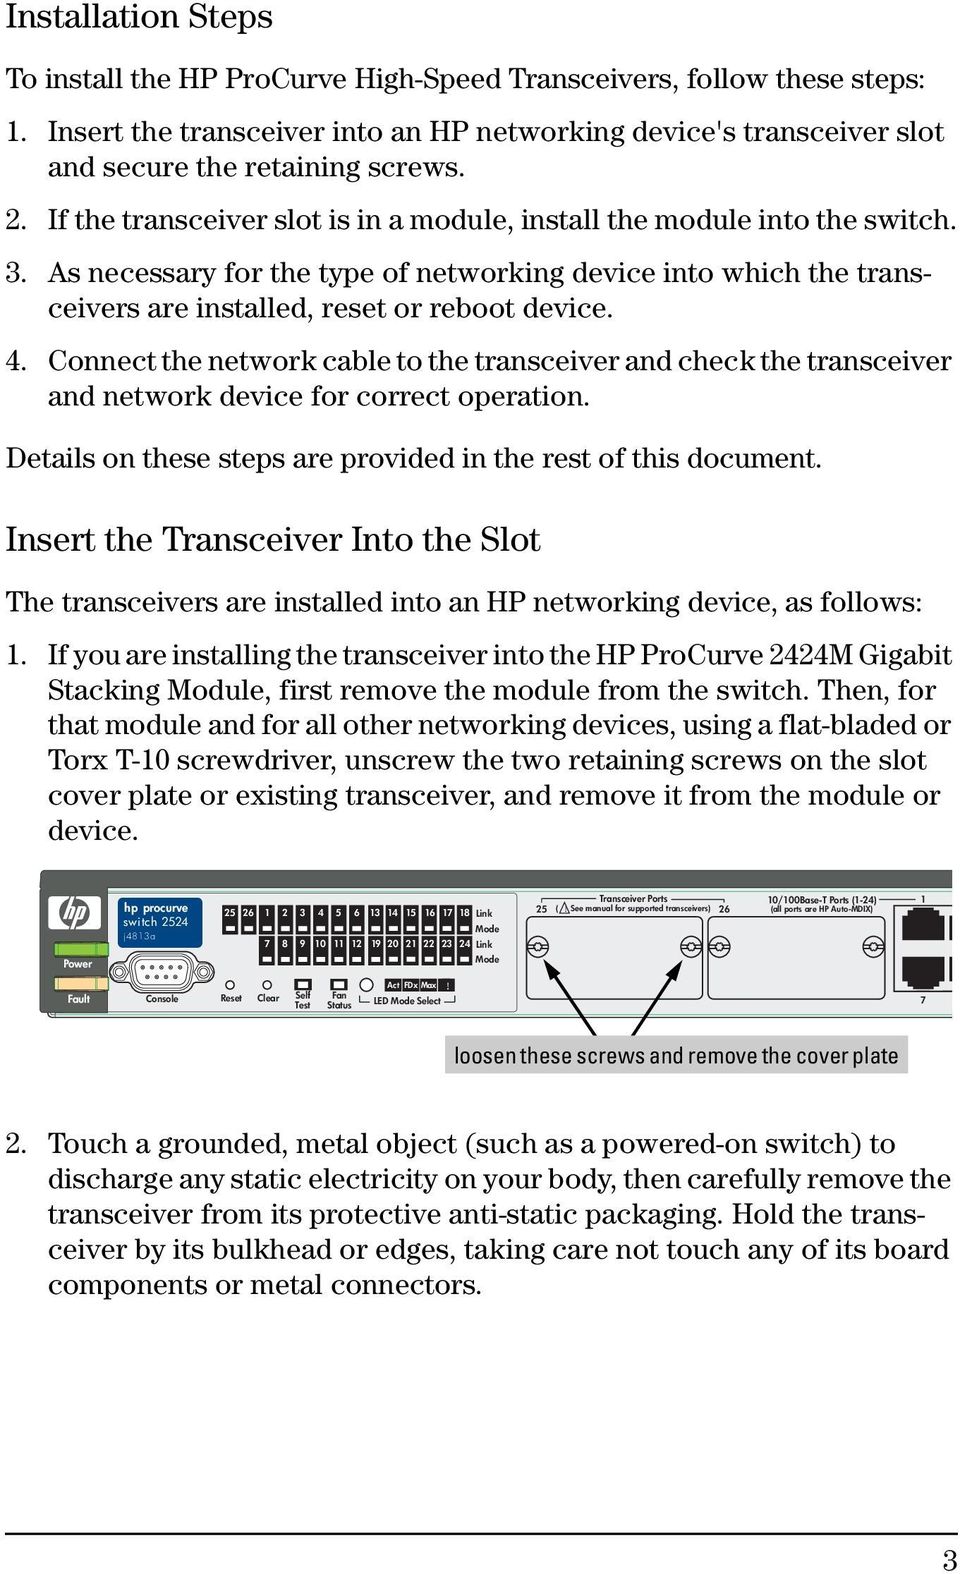 Connect the network cable to the transceiver and check the transceiver and network device for correct operation. Details on these steps are provided in the rest of this document.